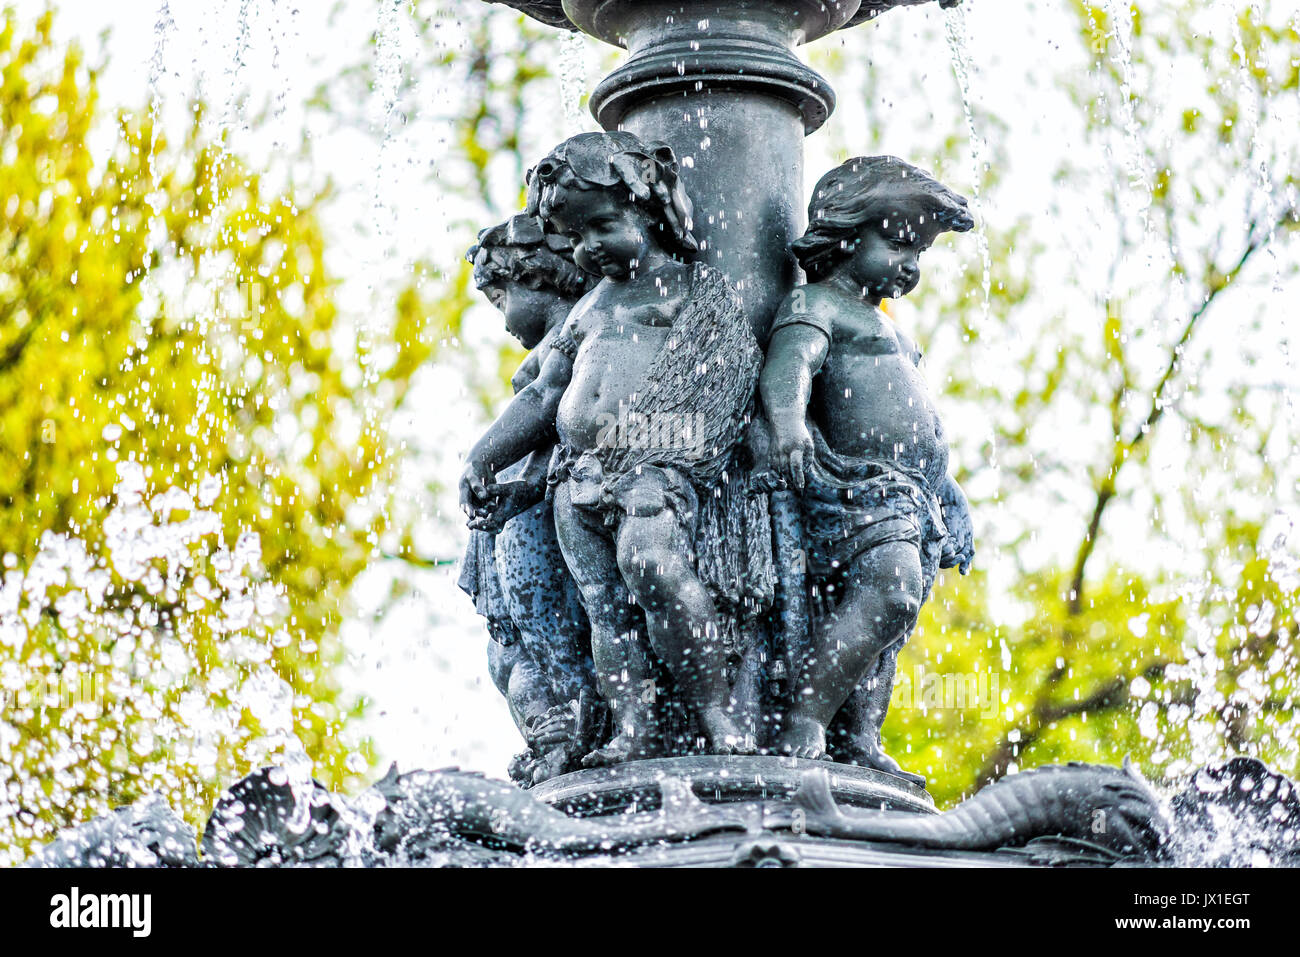 Quebec City, Canada - May 30, 2017: Large water fountain in summer on Avenue Honore Mercier with little greek boy sculptures Stock Photo